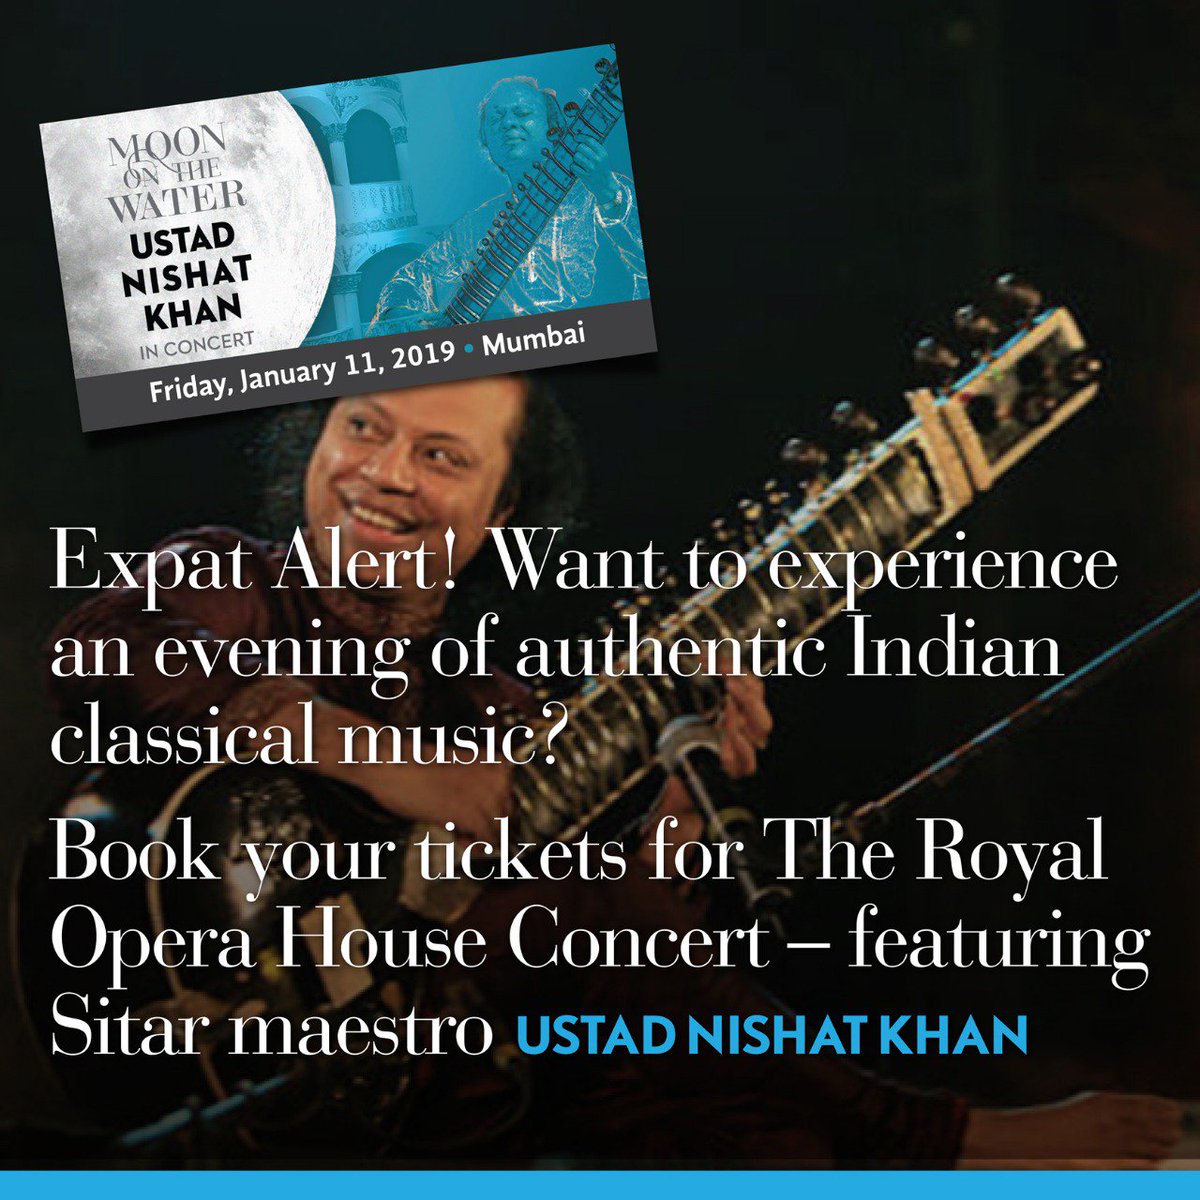 #UstadNishatKhan has performed in some of the most prestigious concert halls of the world. Now watch him perform at The Royal Opera House Mumbai on January 11, 2019. 

Tickets available on bit.ly/2UXEVbe

#SitarMaestro #MoonOnTheWater